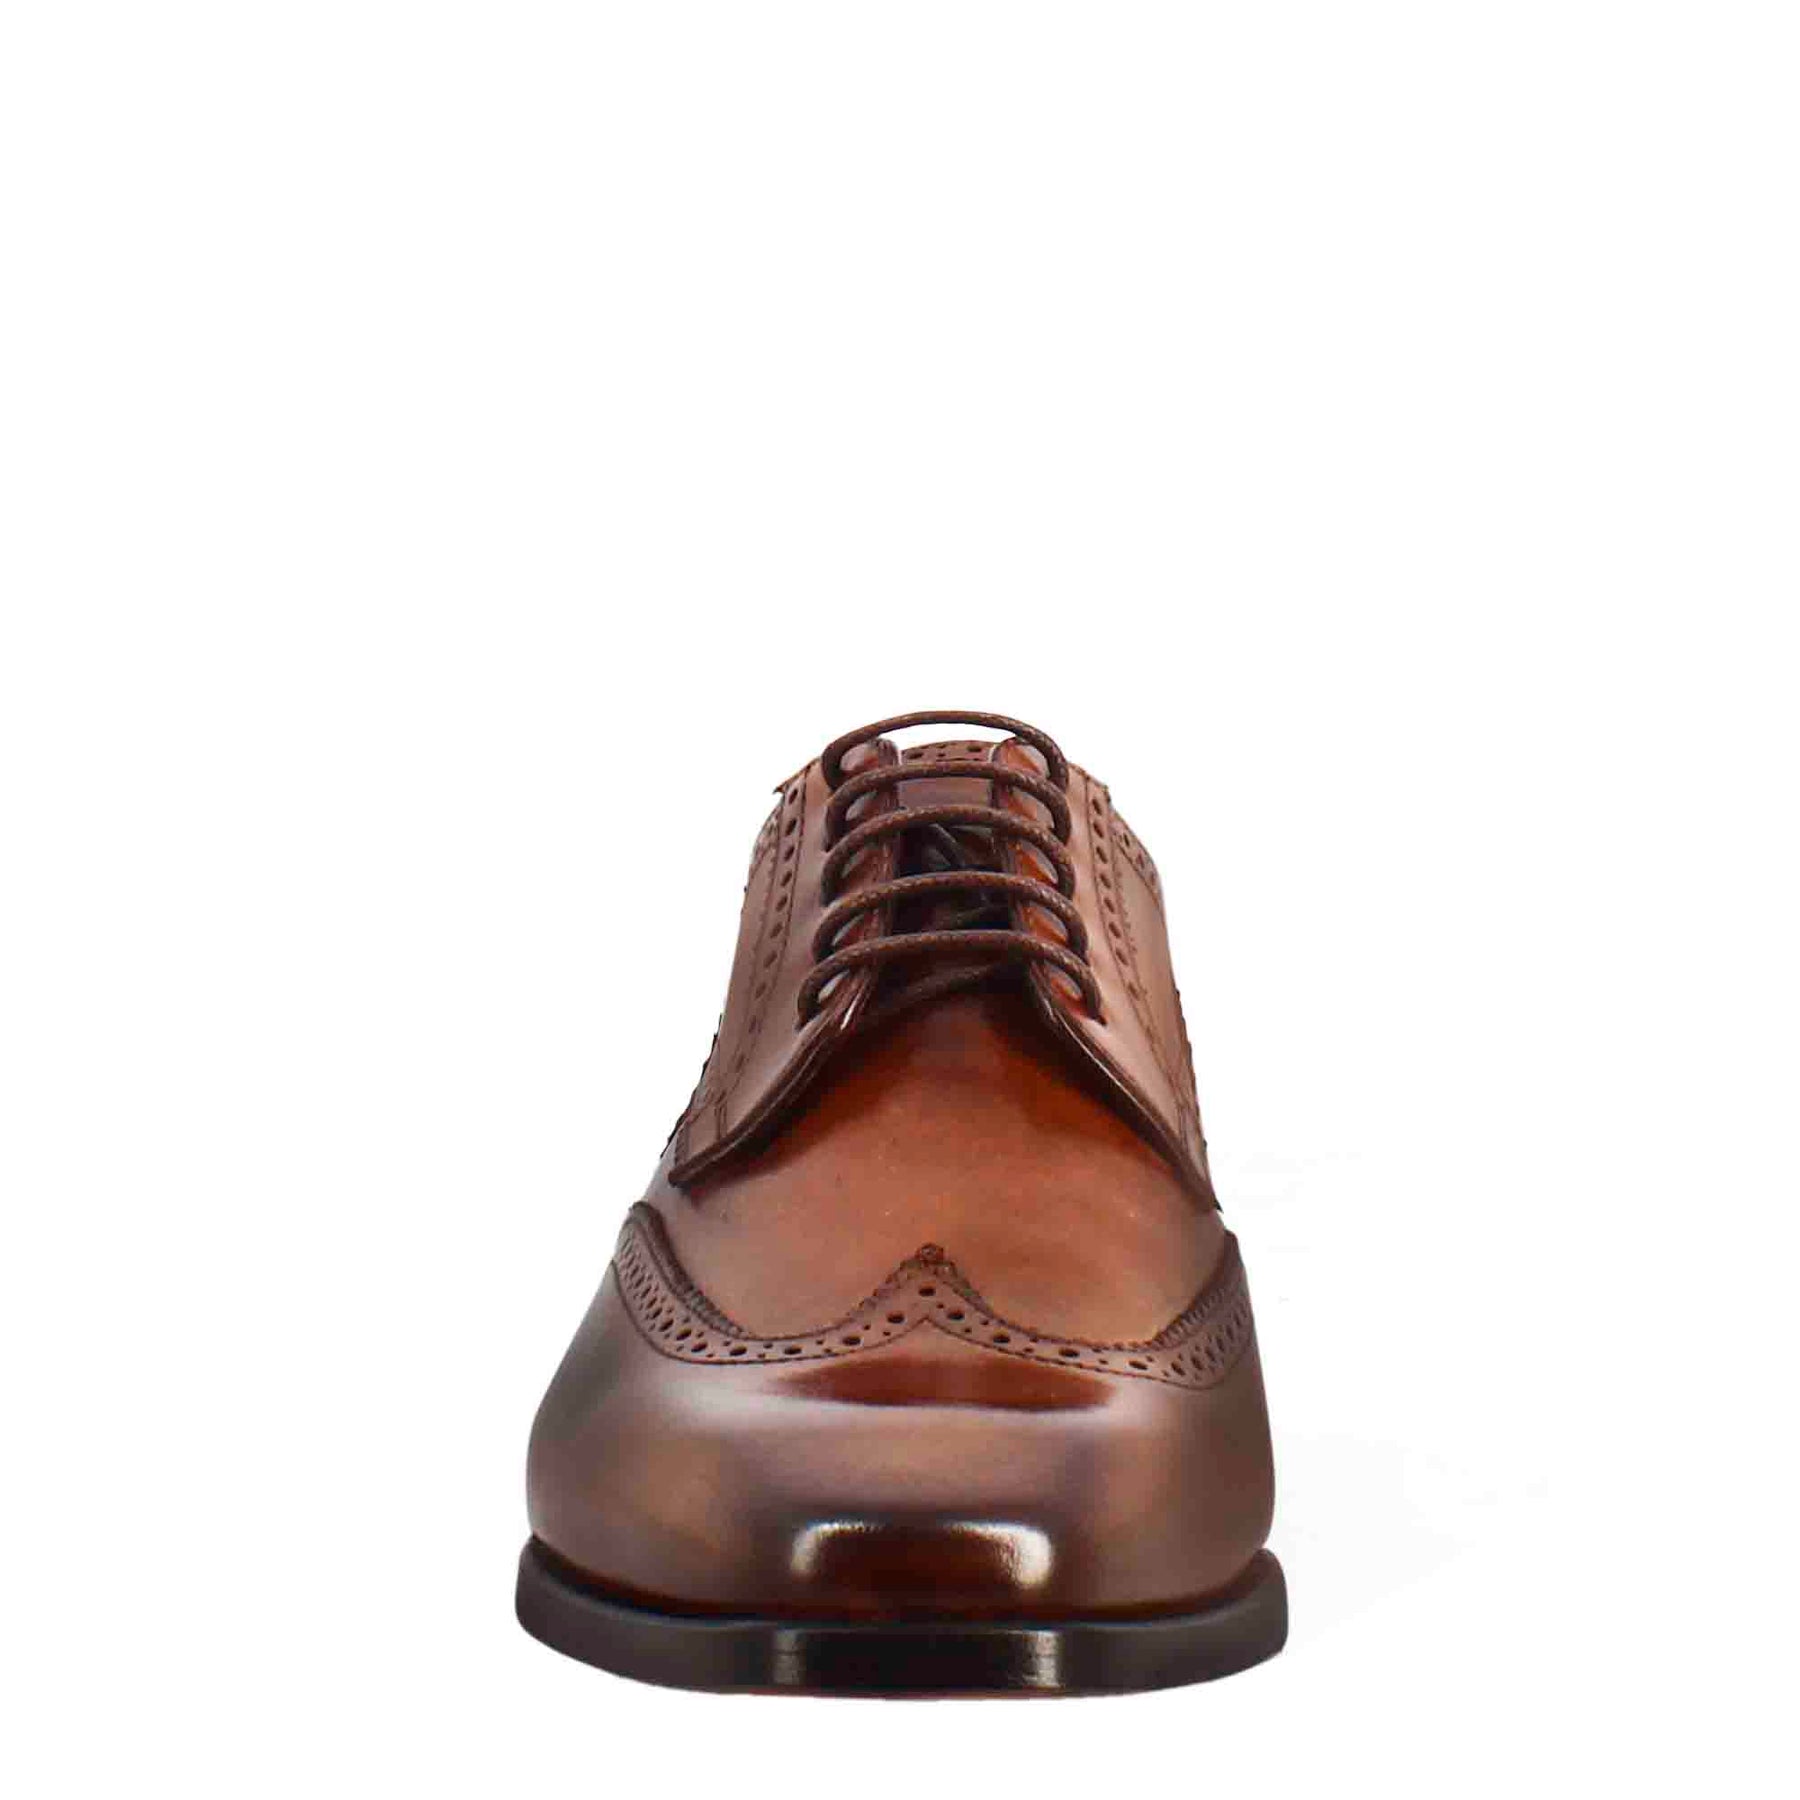 Men's derby in light brown leather with swallowtail and square toe